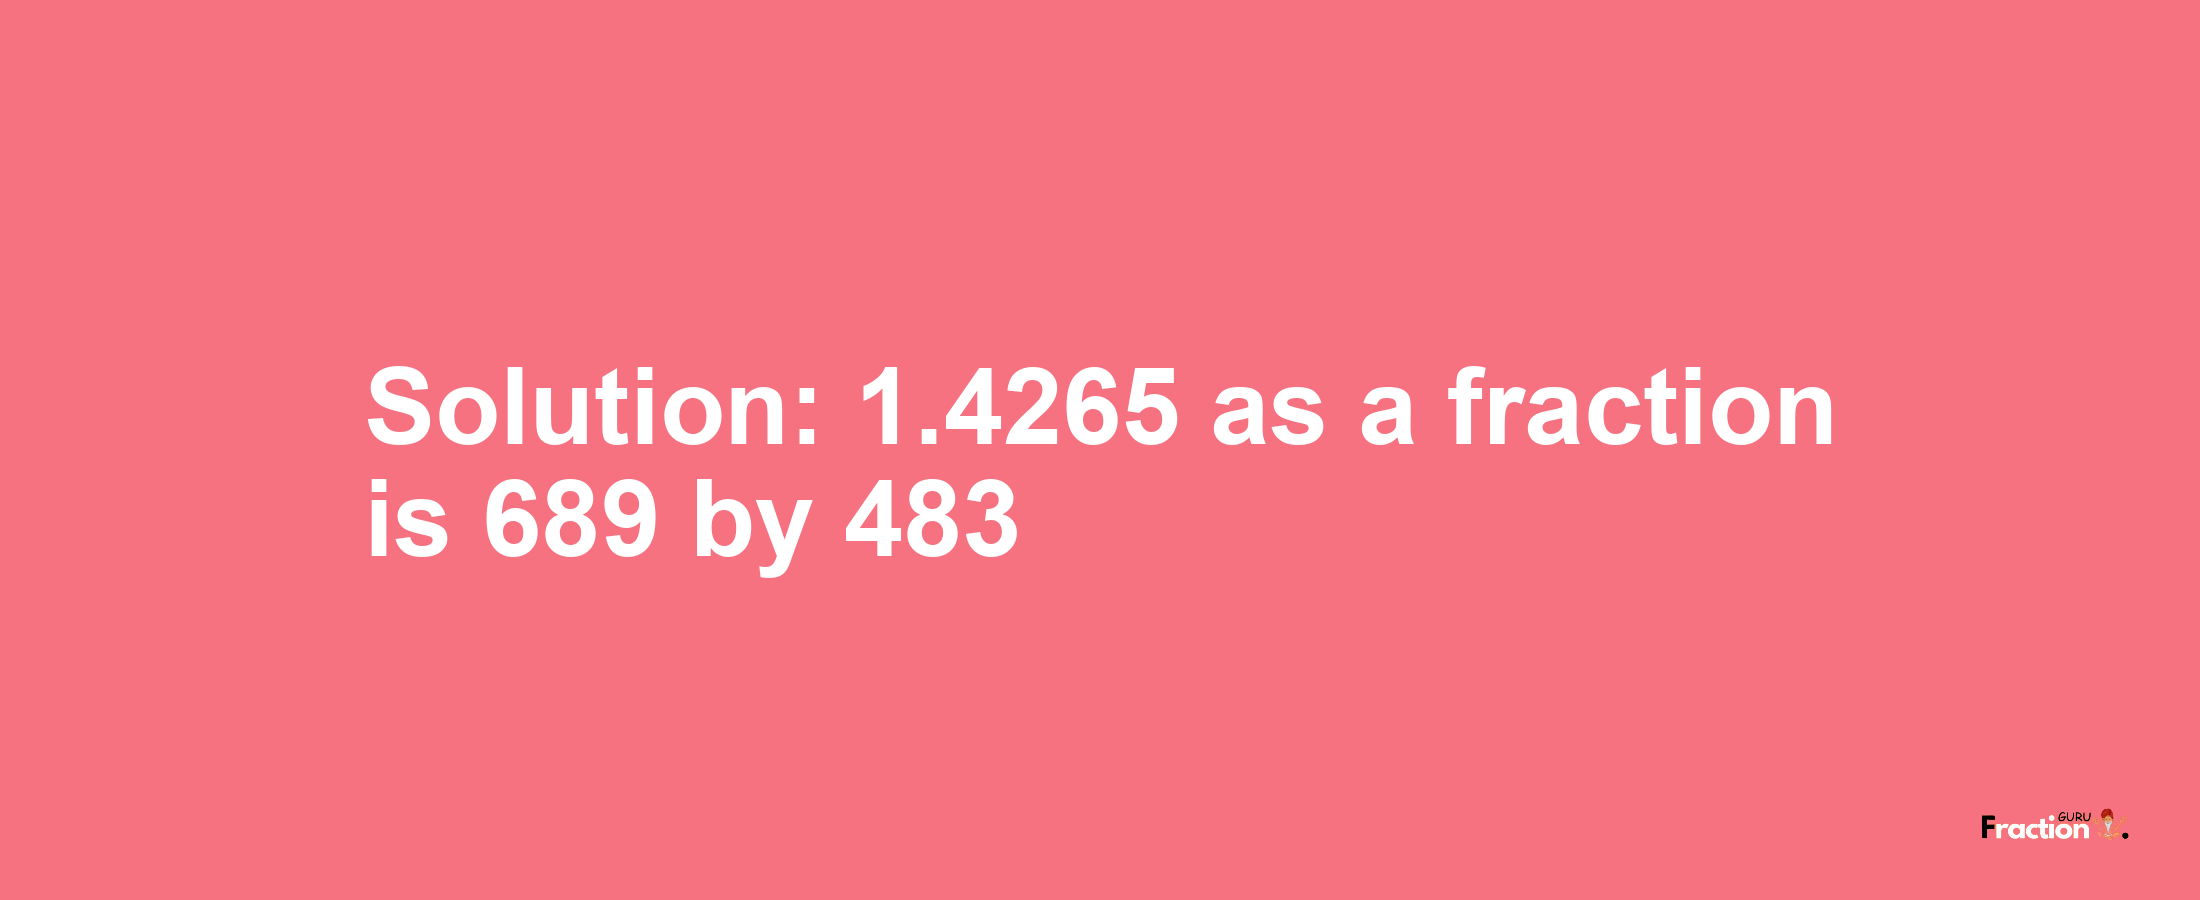 Solution:1.4265 as a fraction is 689/483